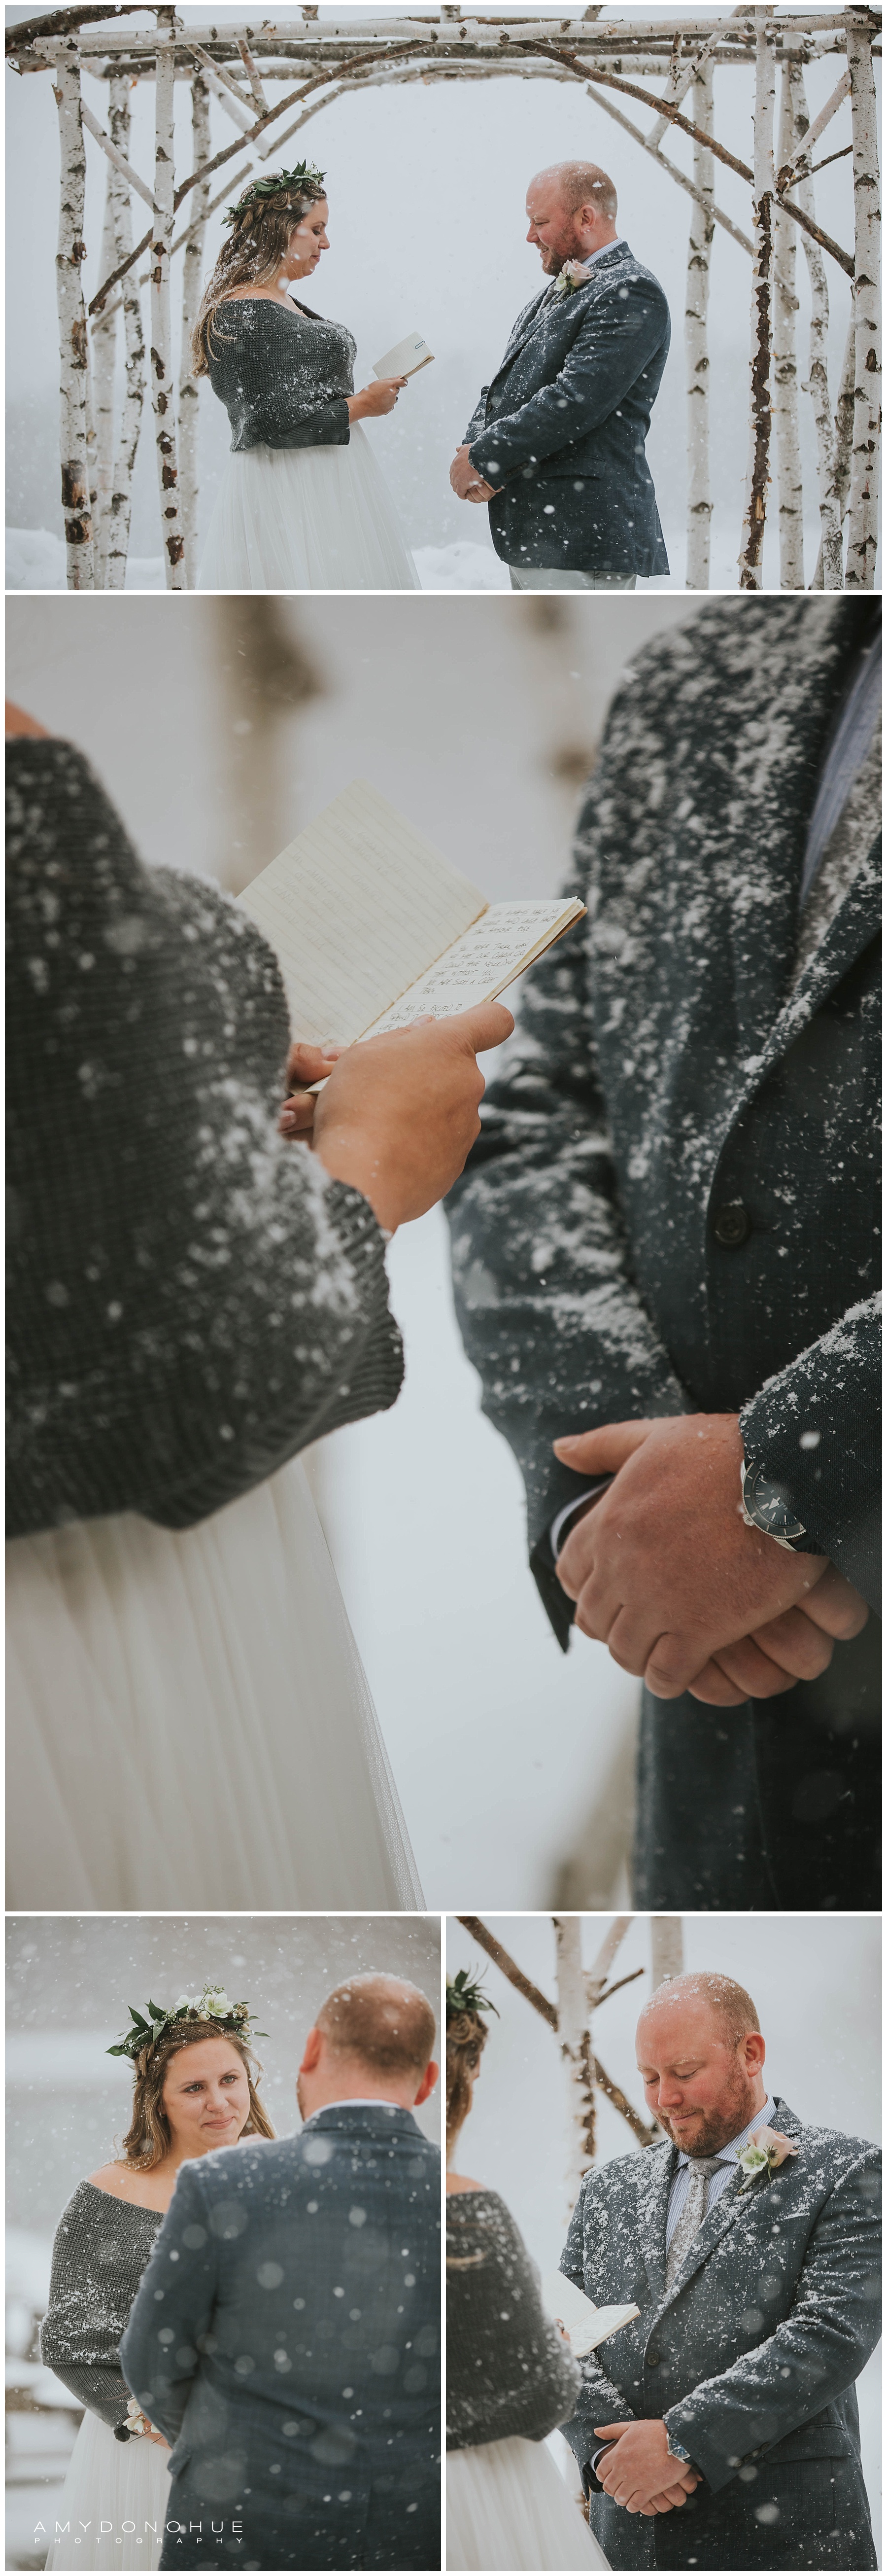 Intimate Winter Elopement | Vermont Wedding Photographer | © Amy Donohue Photography